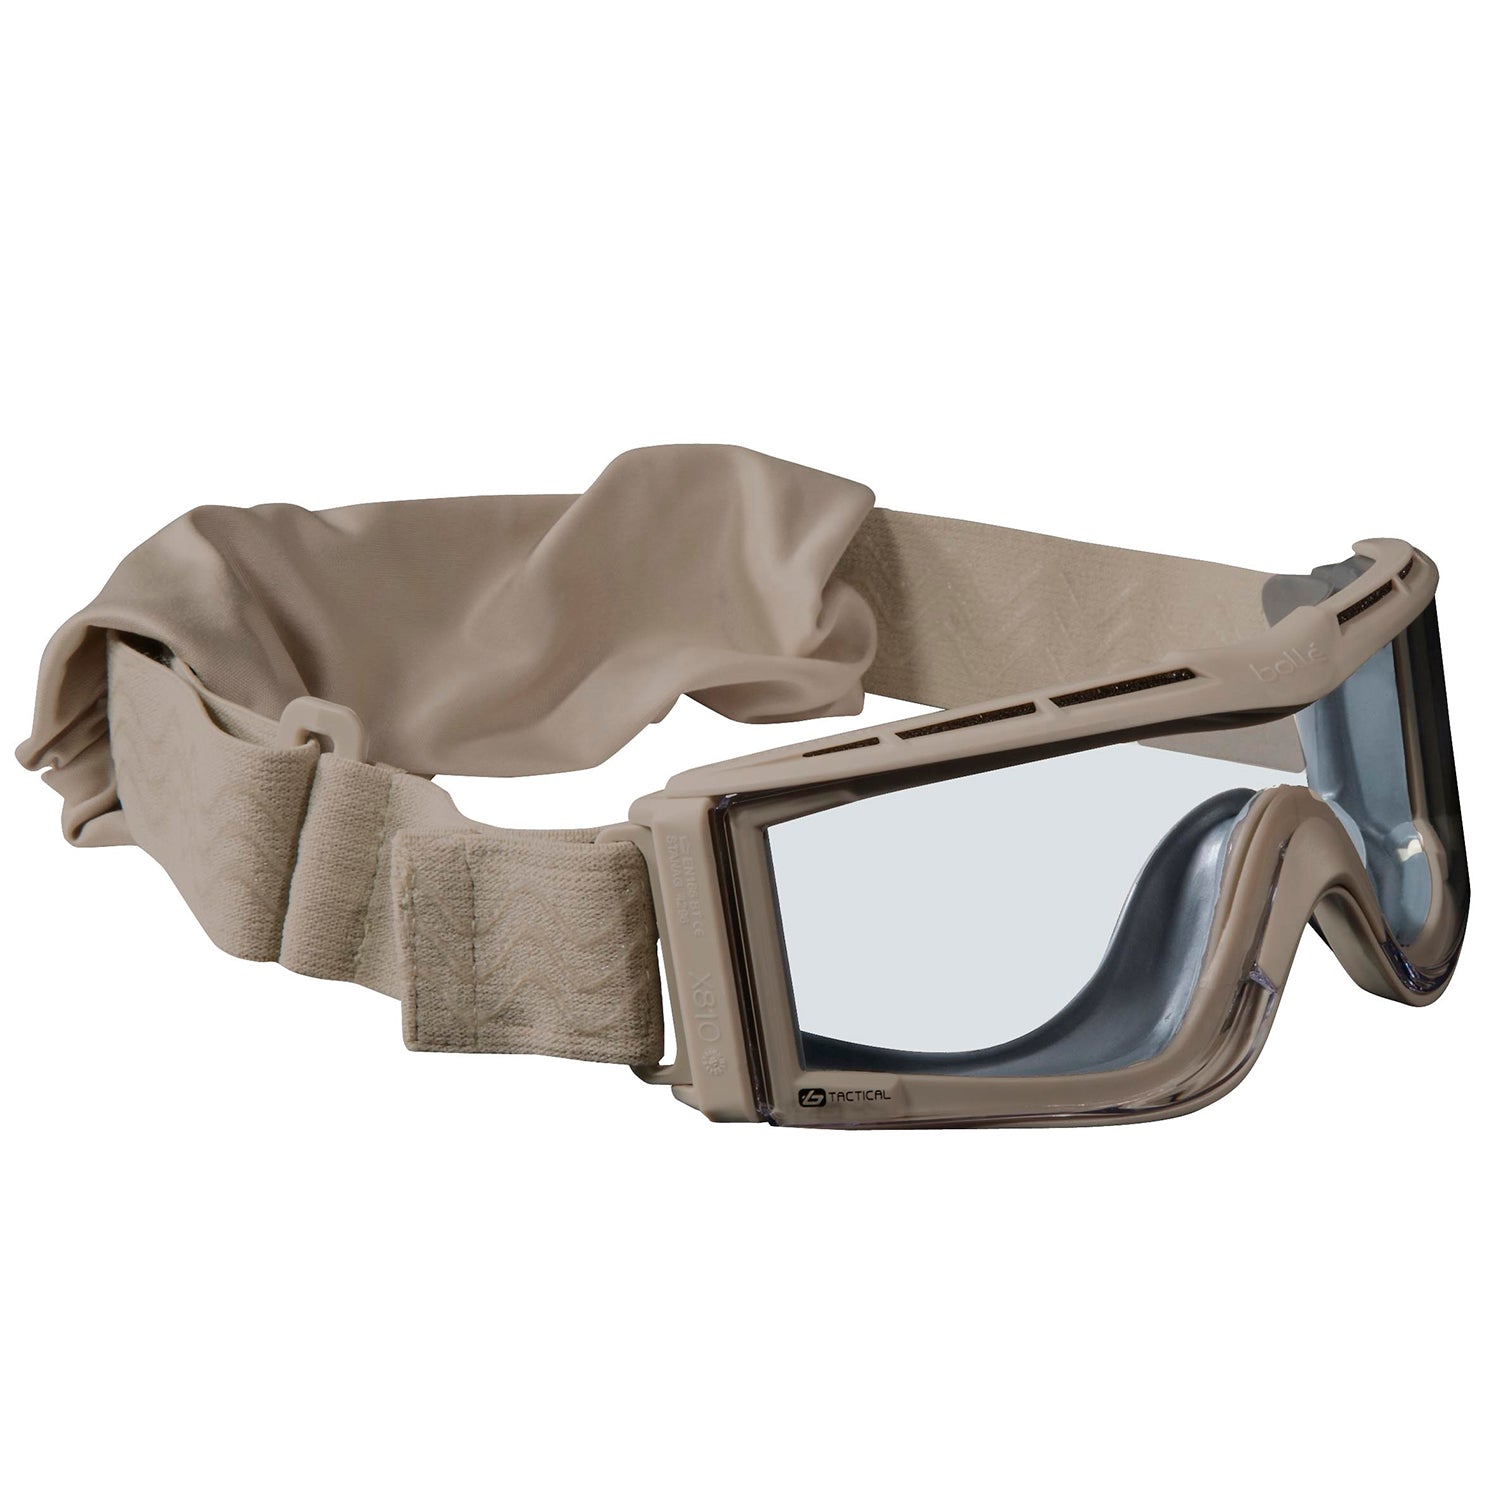 Bolle X810 tactical goggles Tan